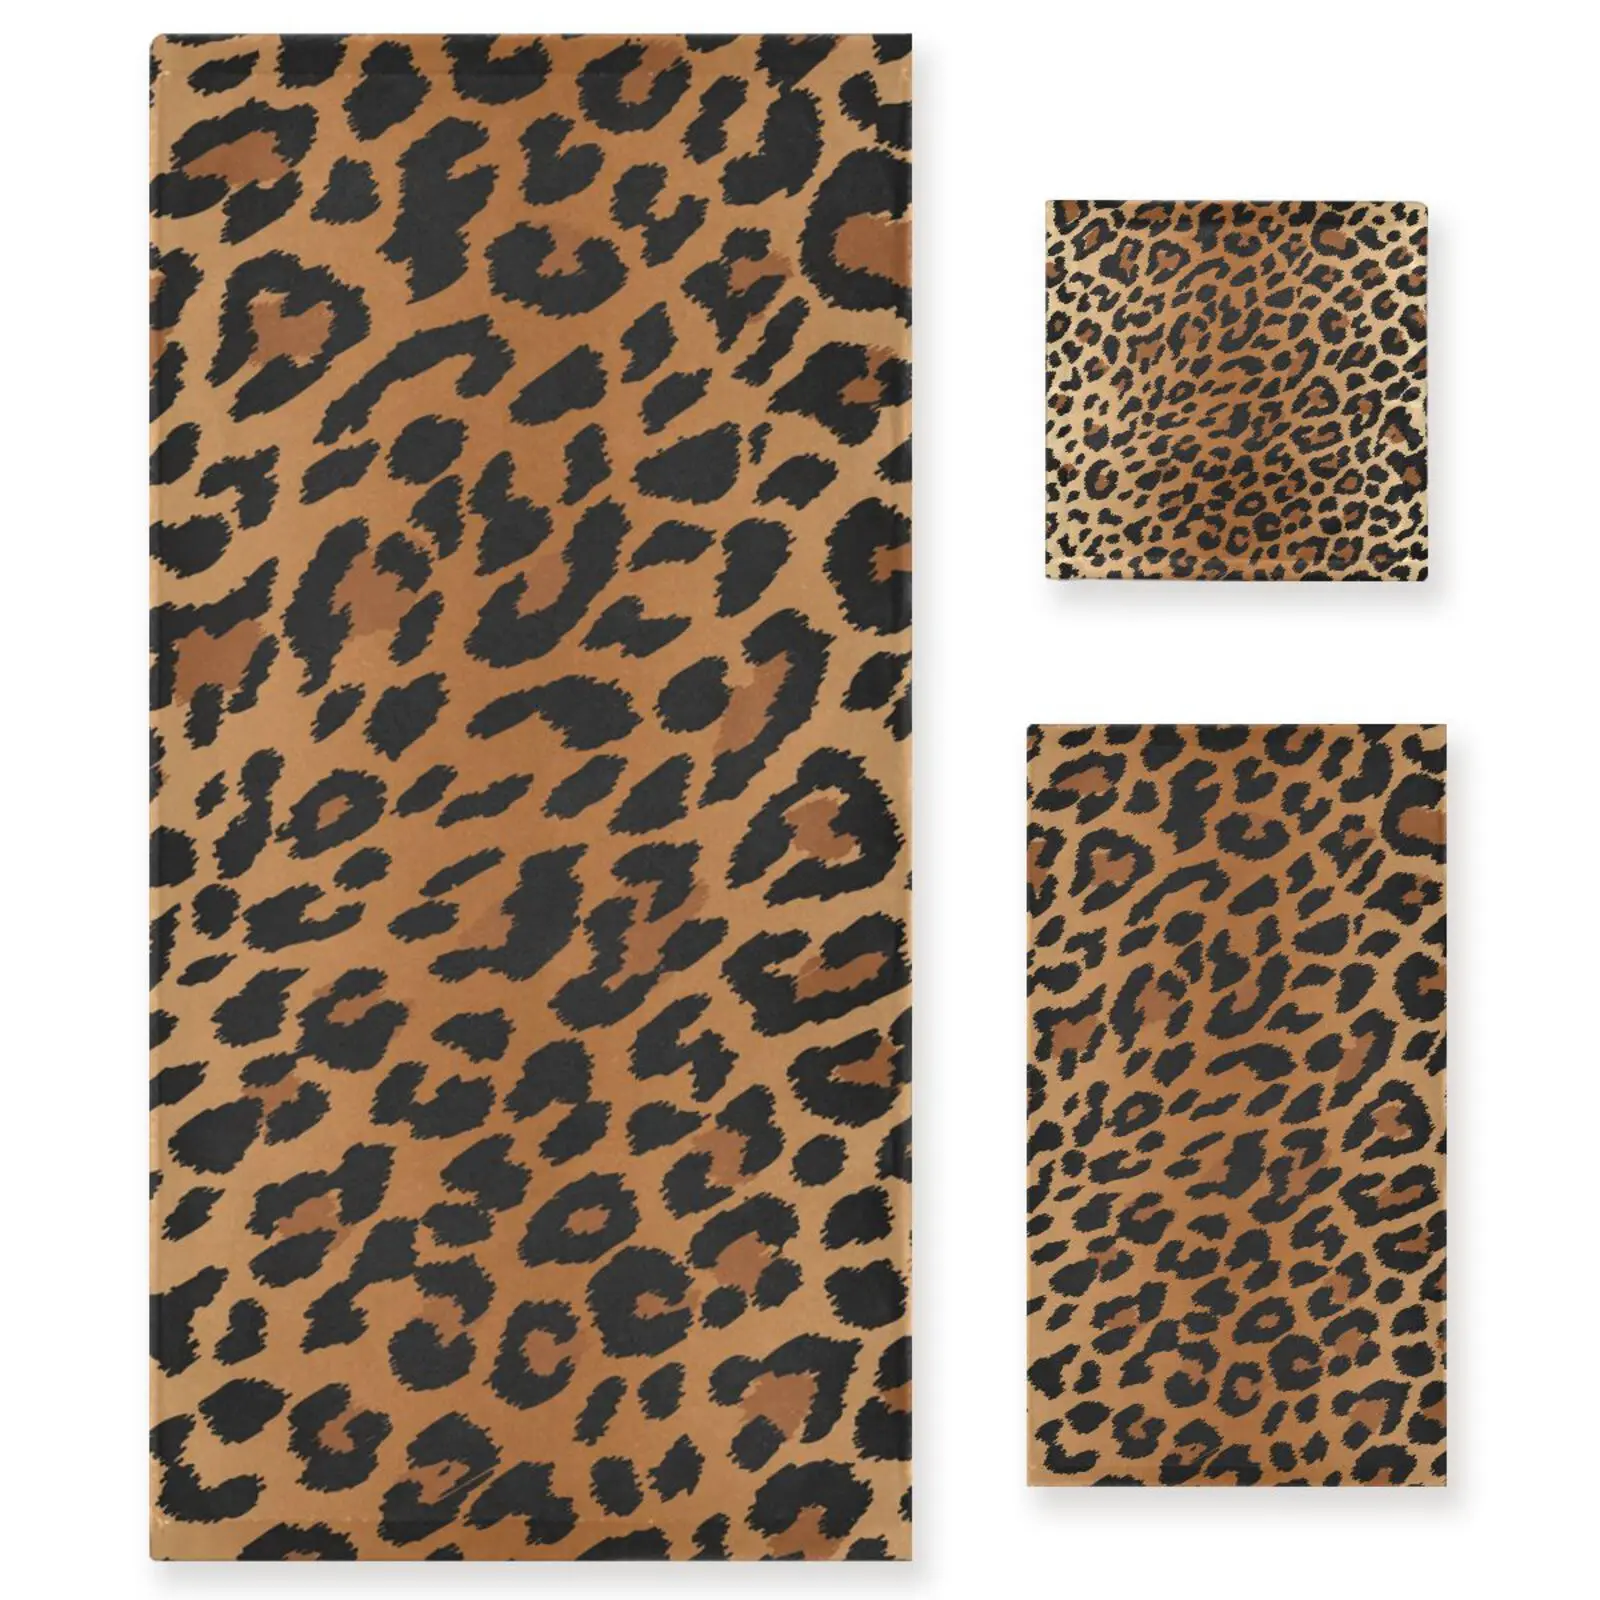 

Fashion Leopard Print Towels Set of 3 Cotton Highly Absorbent Soft Hand Towel For Bathroom Kitchen Hotel Washcloth Bath Towel